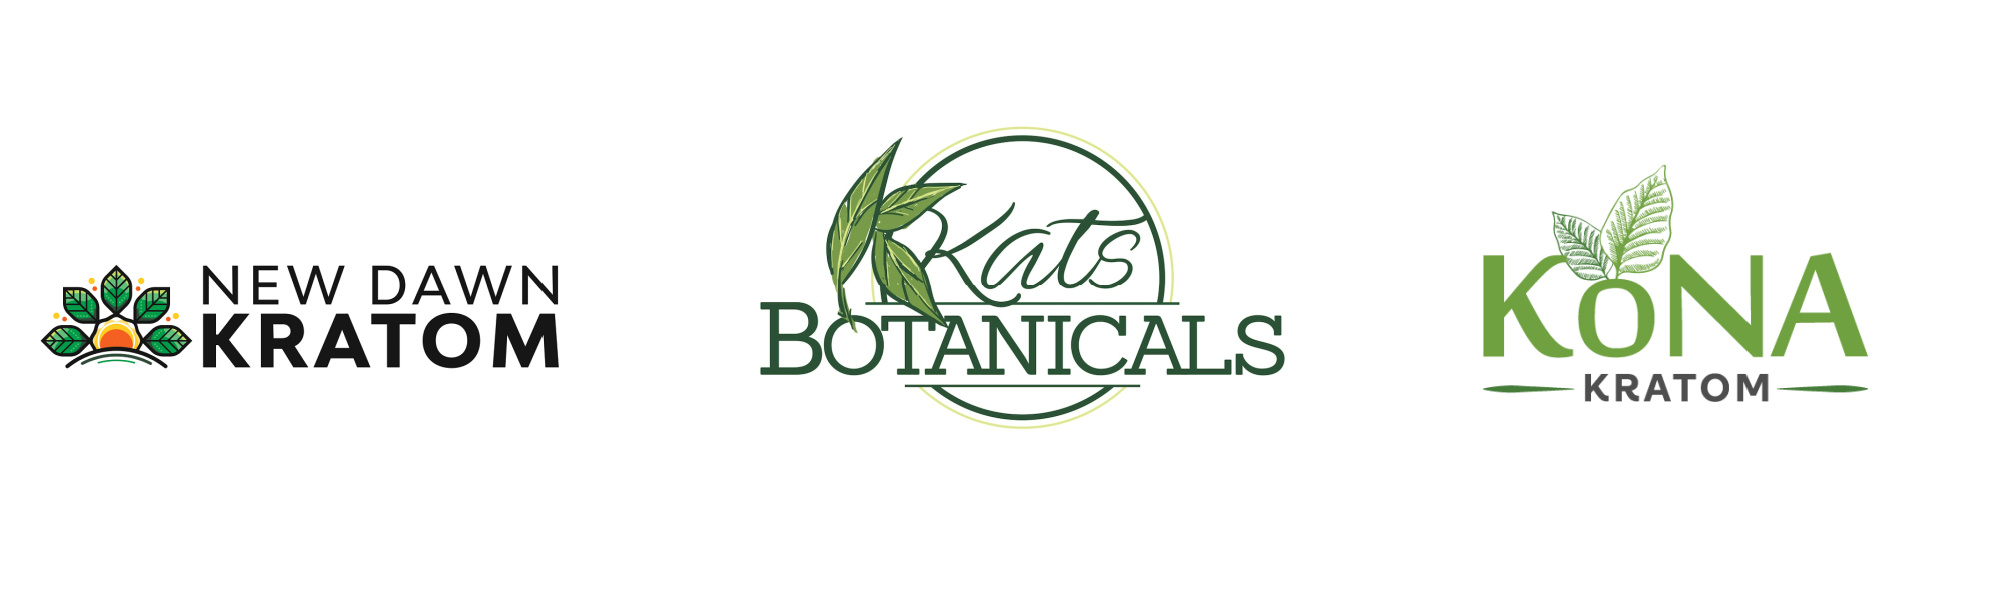 image of reputable online stores that sell kratom